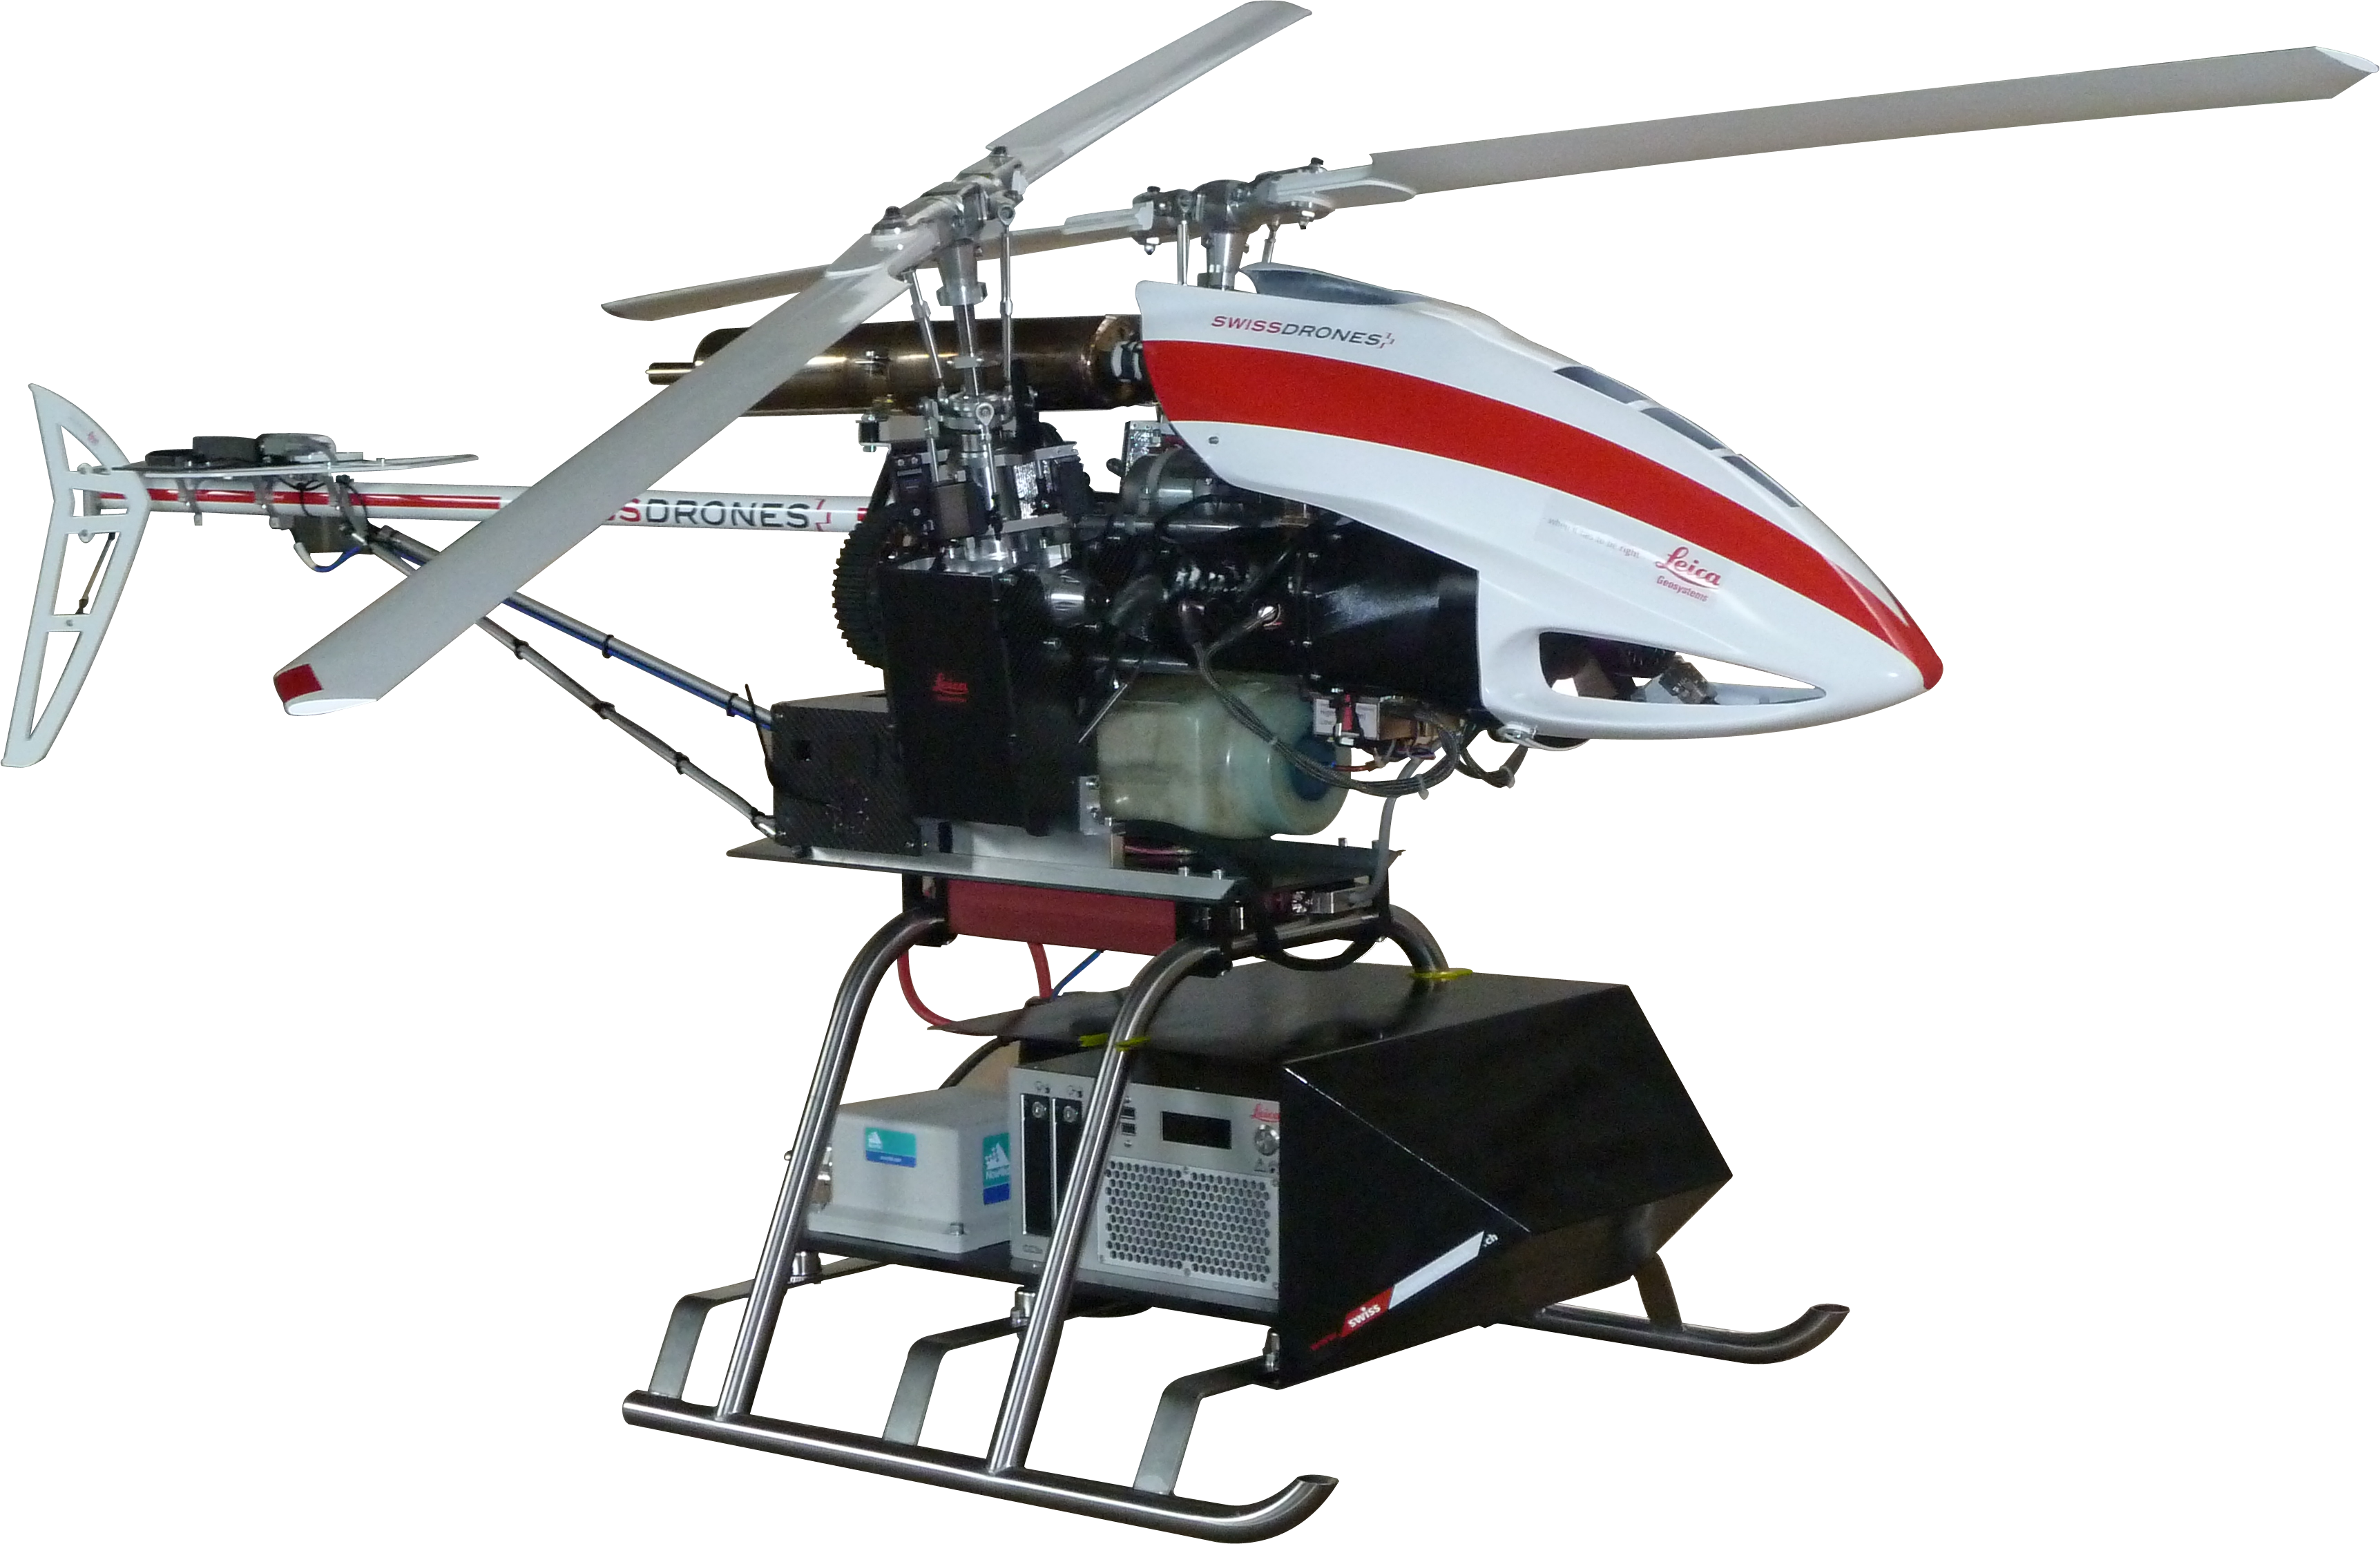 Unmanned aerial vehicles for mining applications Engineer Live